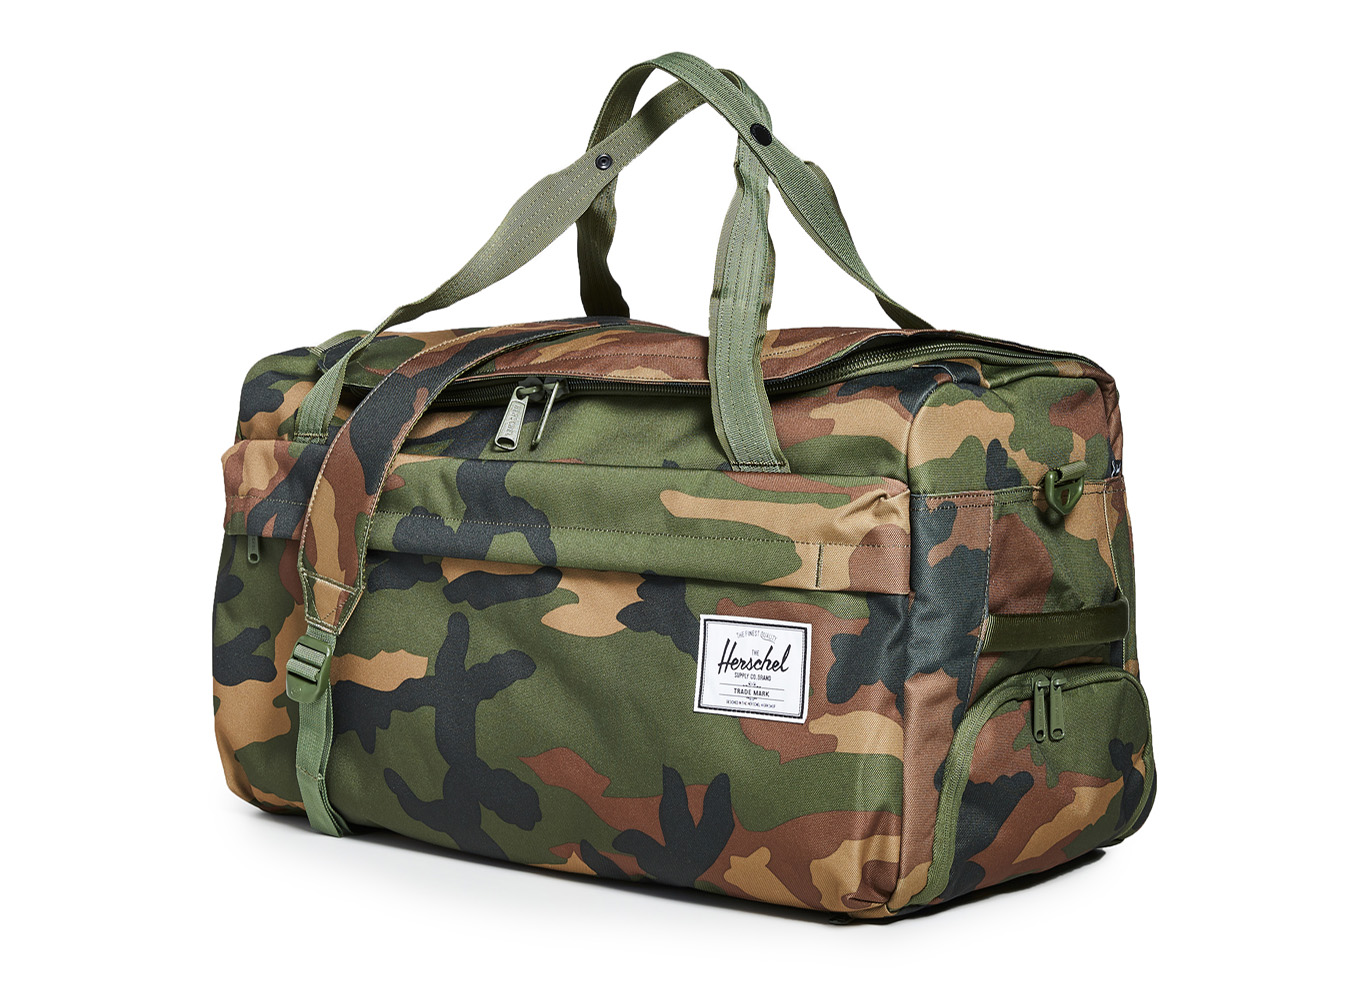 13 Of The Best Men's Duffel Bags For Your Weekend Travels